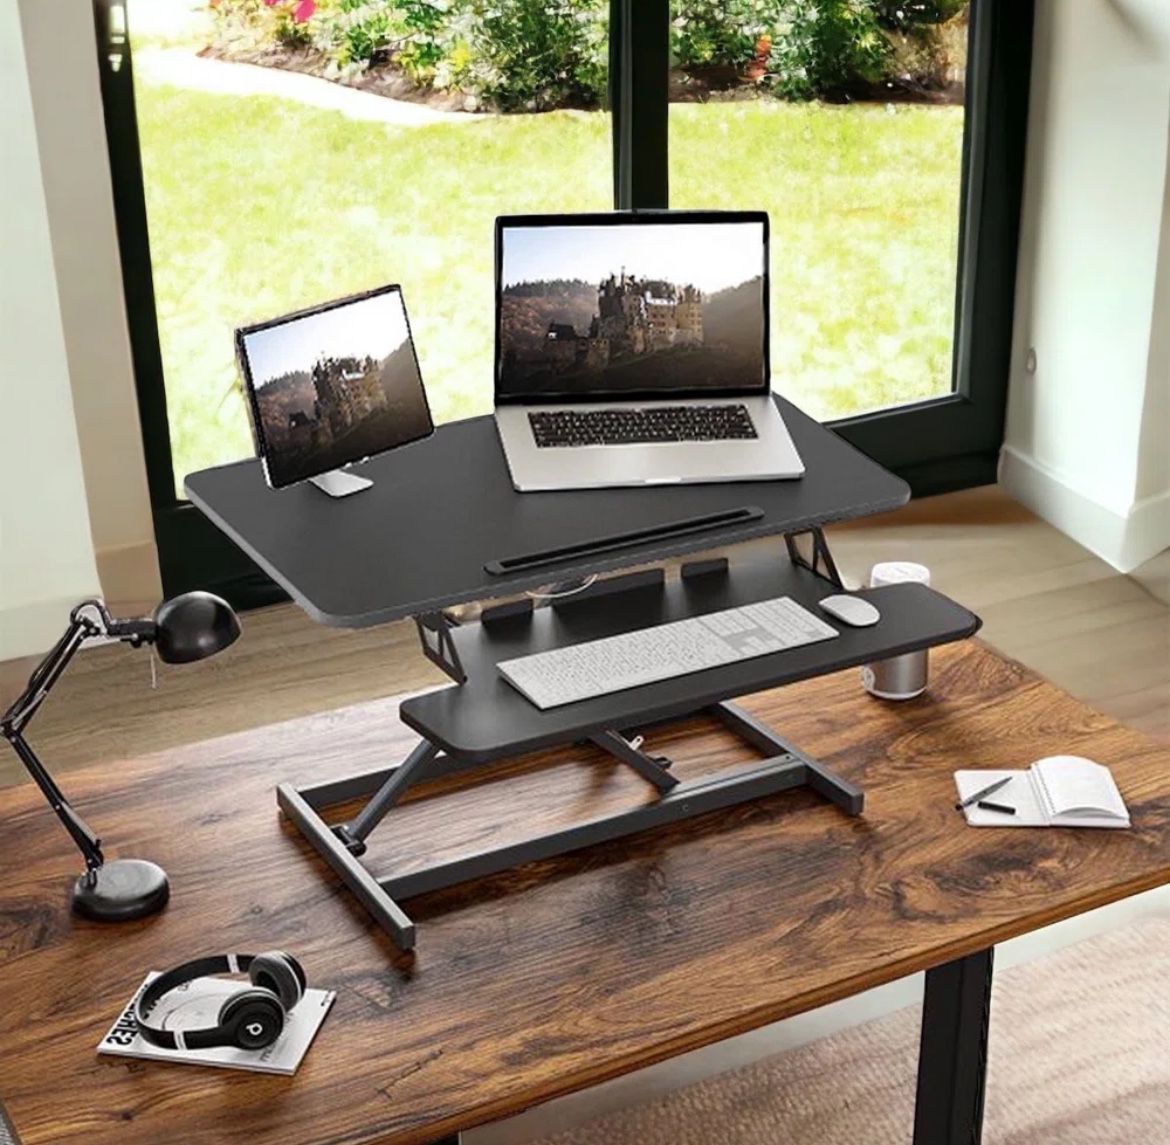 Standing Desk Converter 34.6" Adjustable Stand-Up Computer Riser – Adjustable Height (4in To 19in) Incl. Cable Ties – Laptop Cellphone Stand Placehold